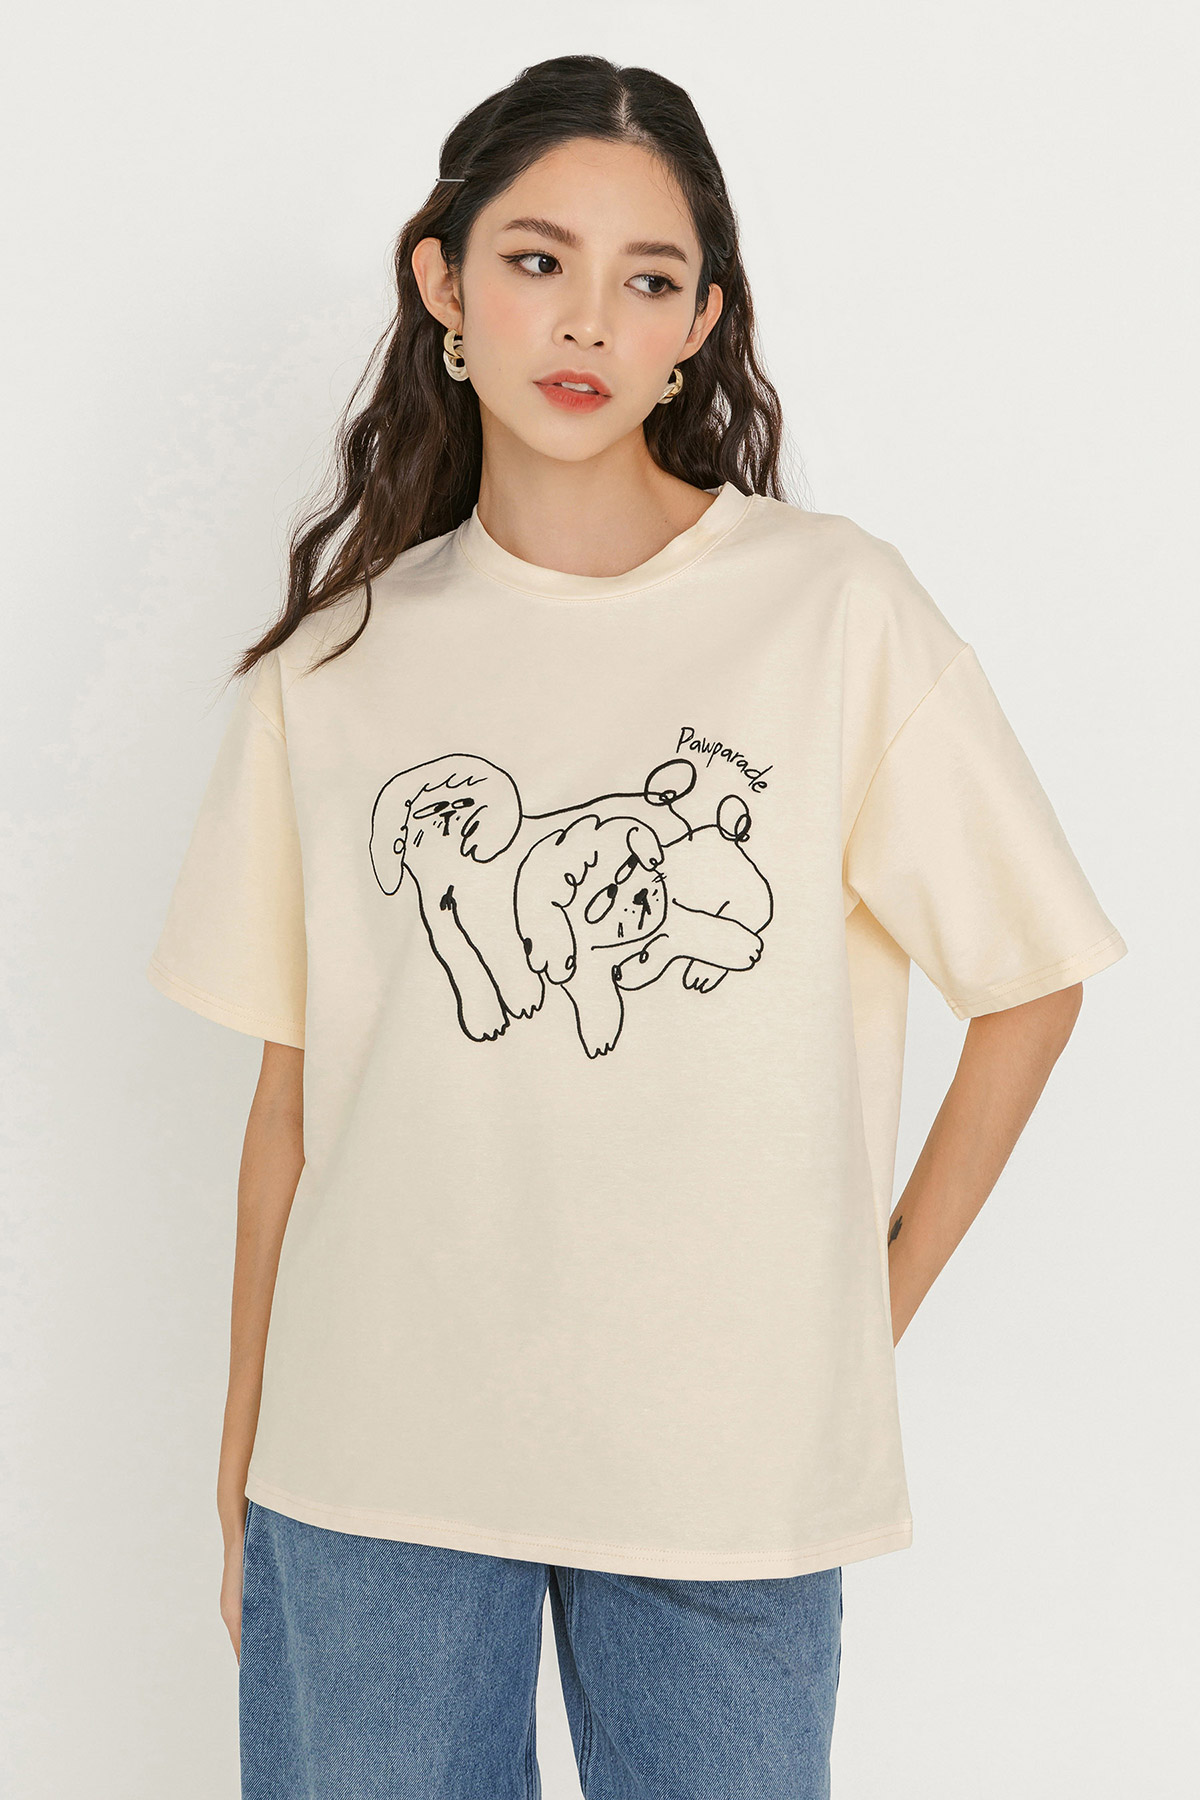 *SALE* PAWPARADE TEE UNISEX - DEUX CREAMY [BY MODPARADE]